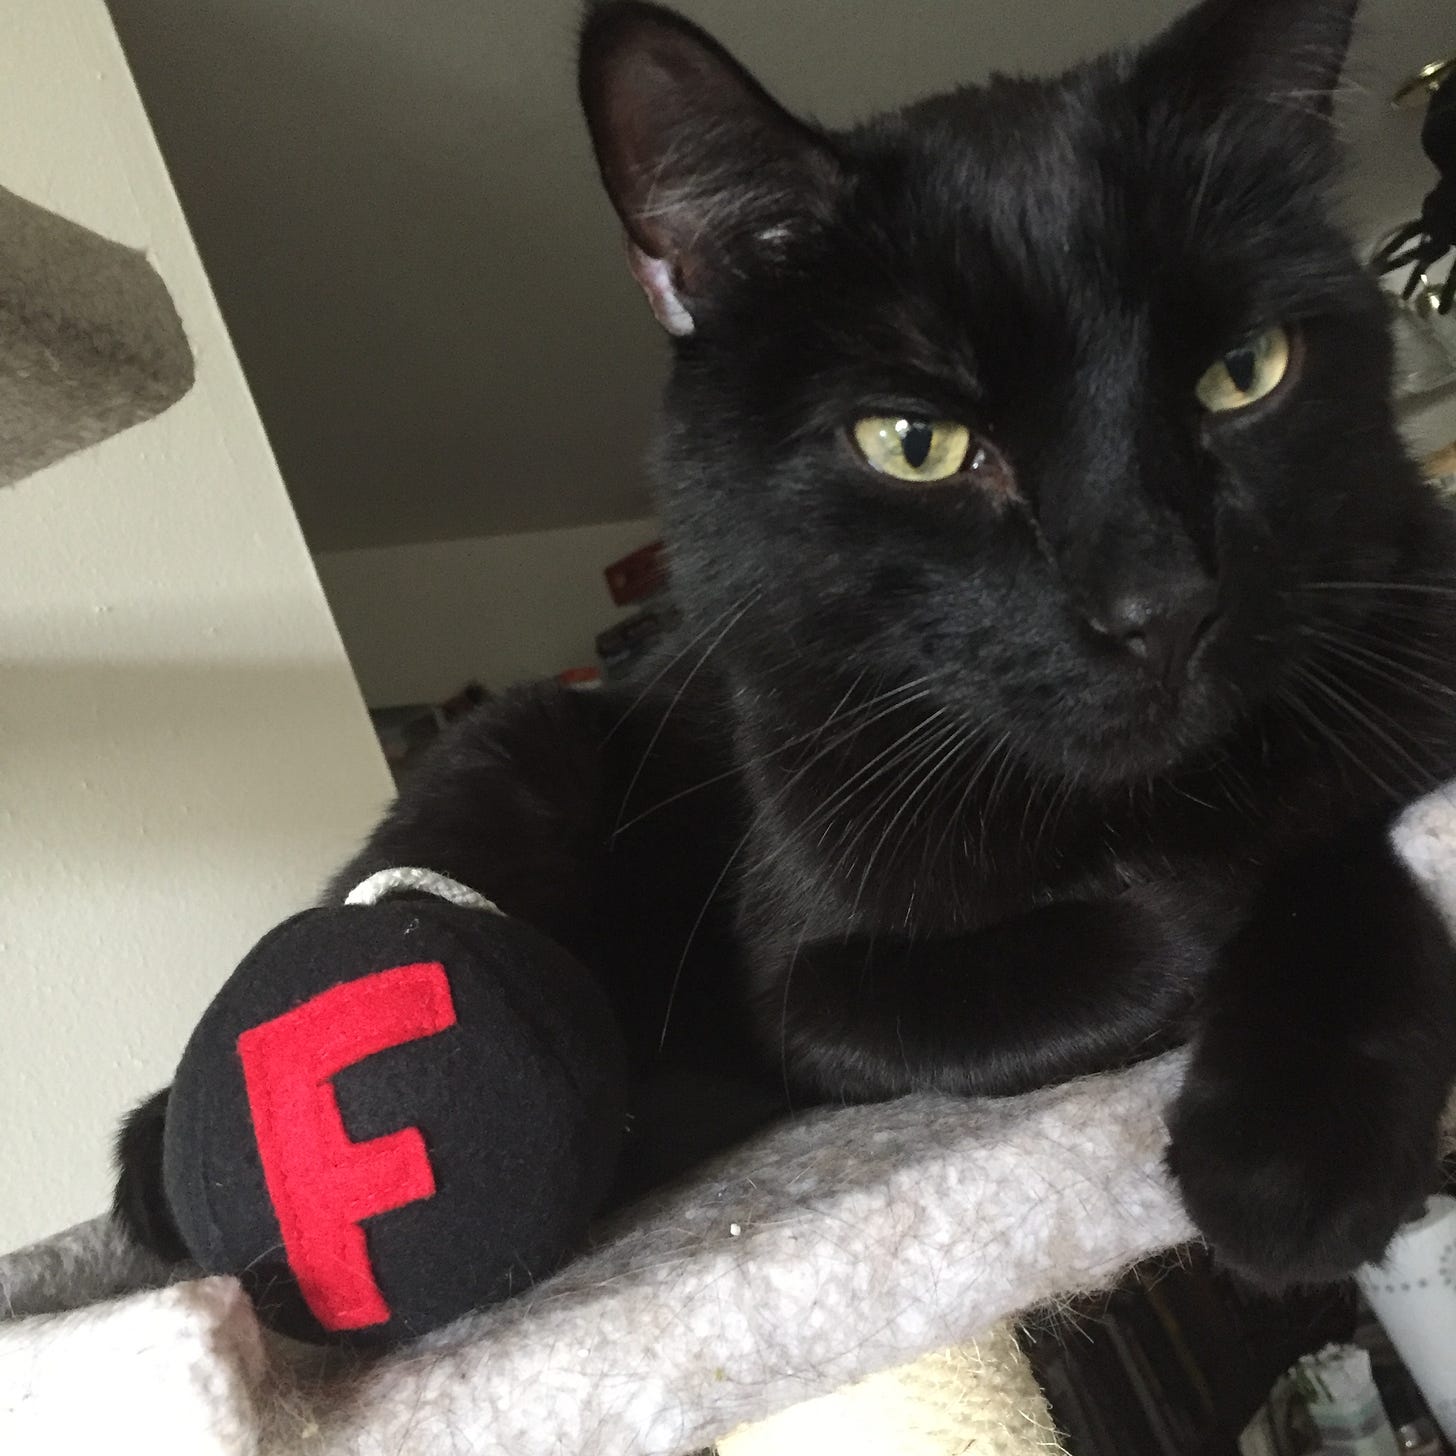 A black cat with green eyes on a cat tower next to an F-bomb plushie.